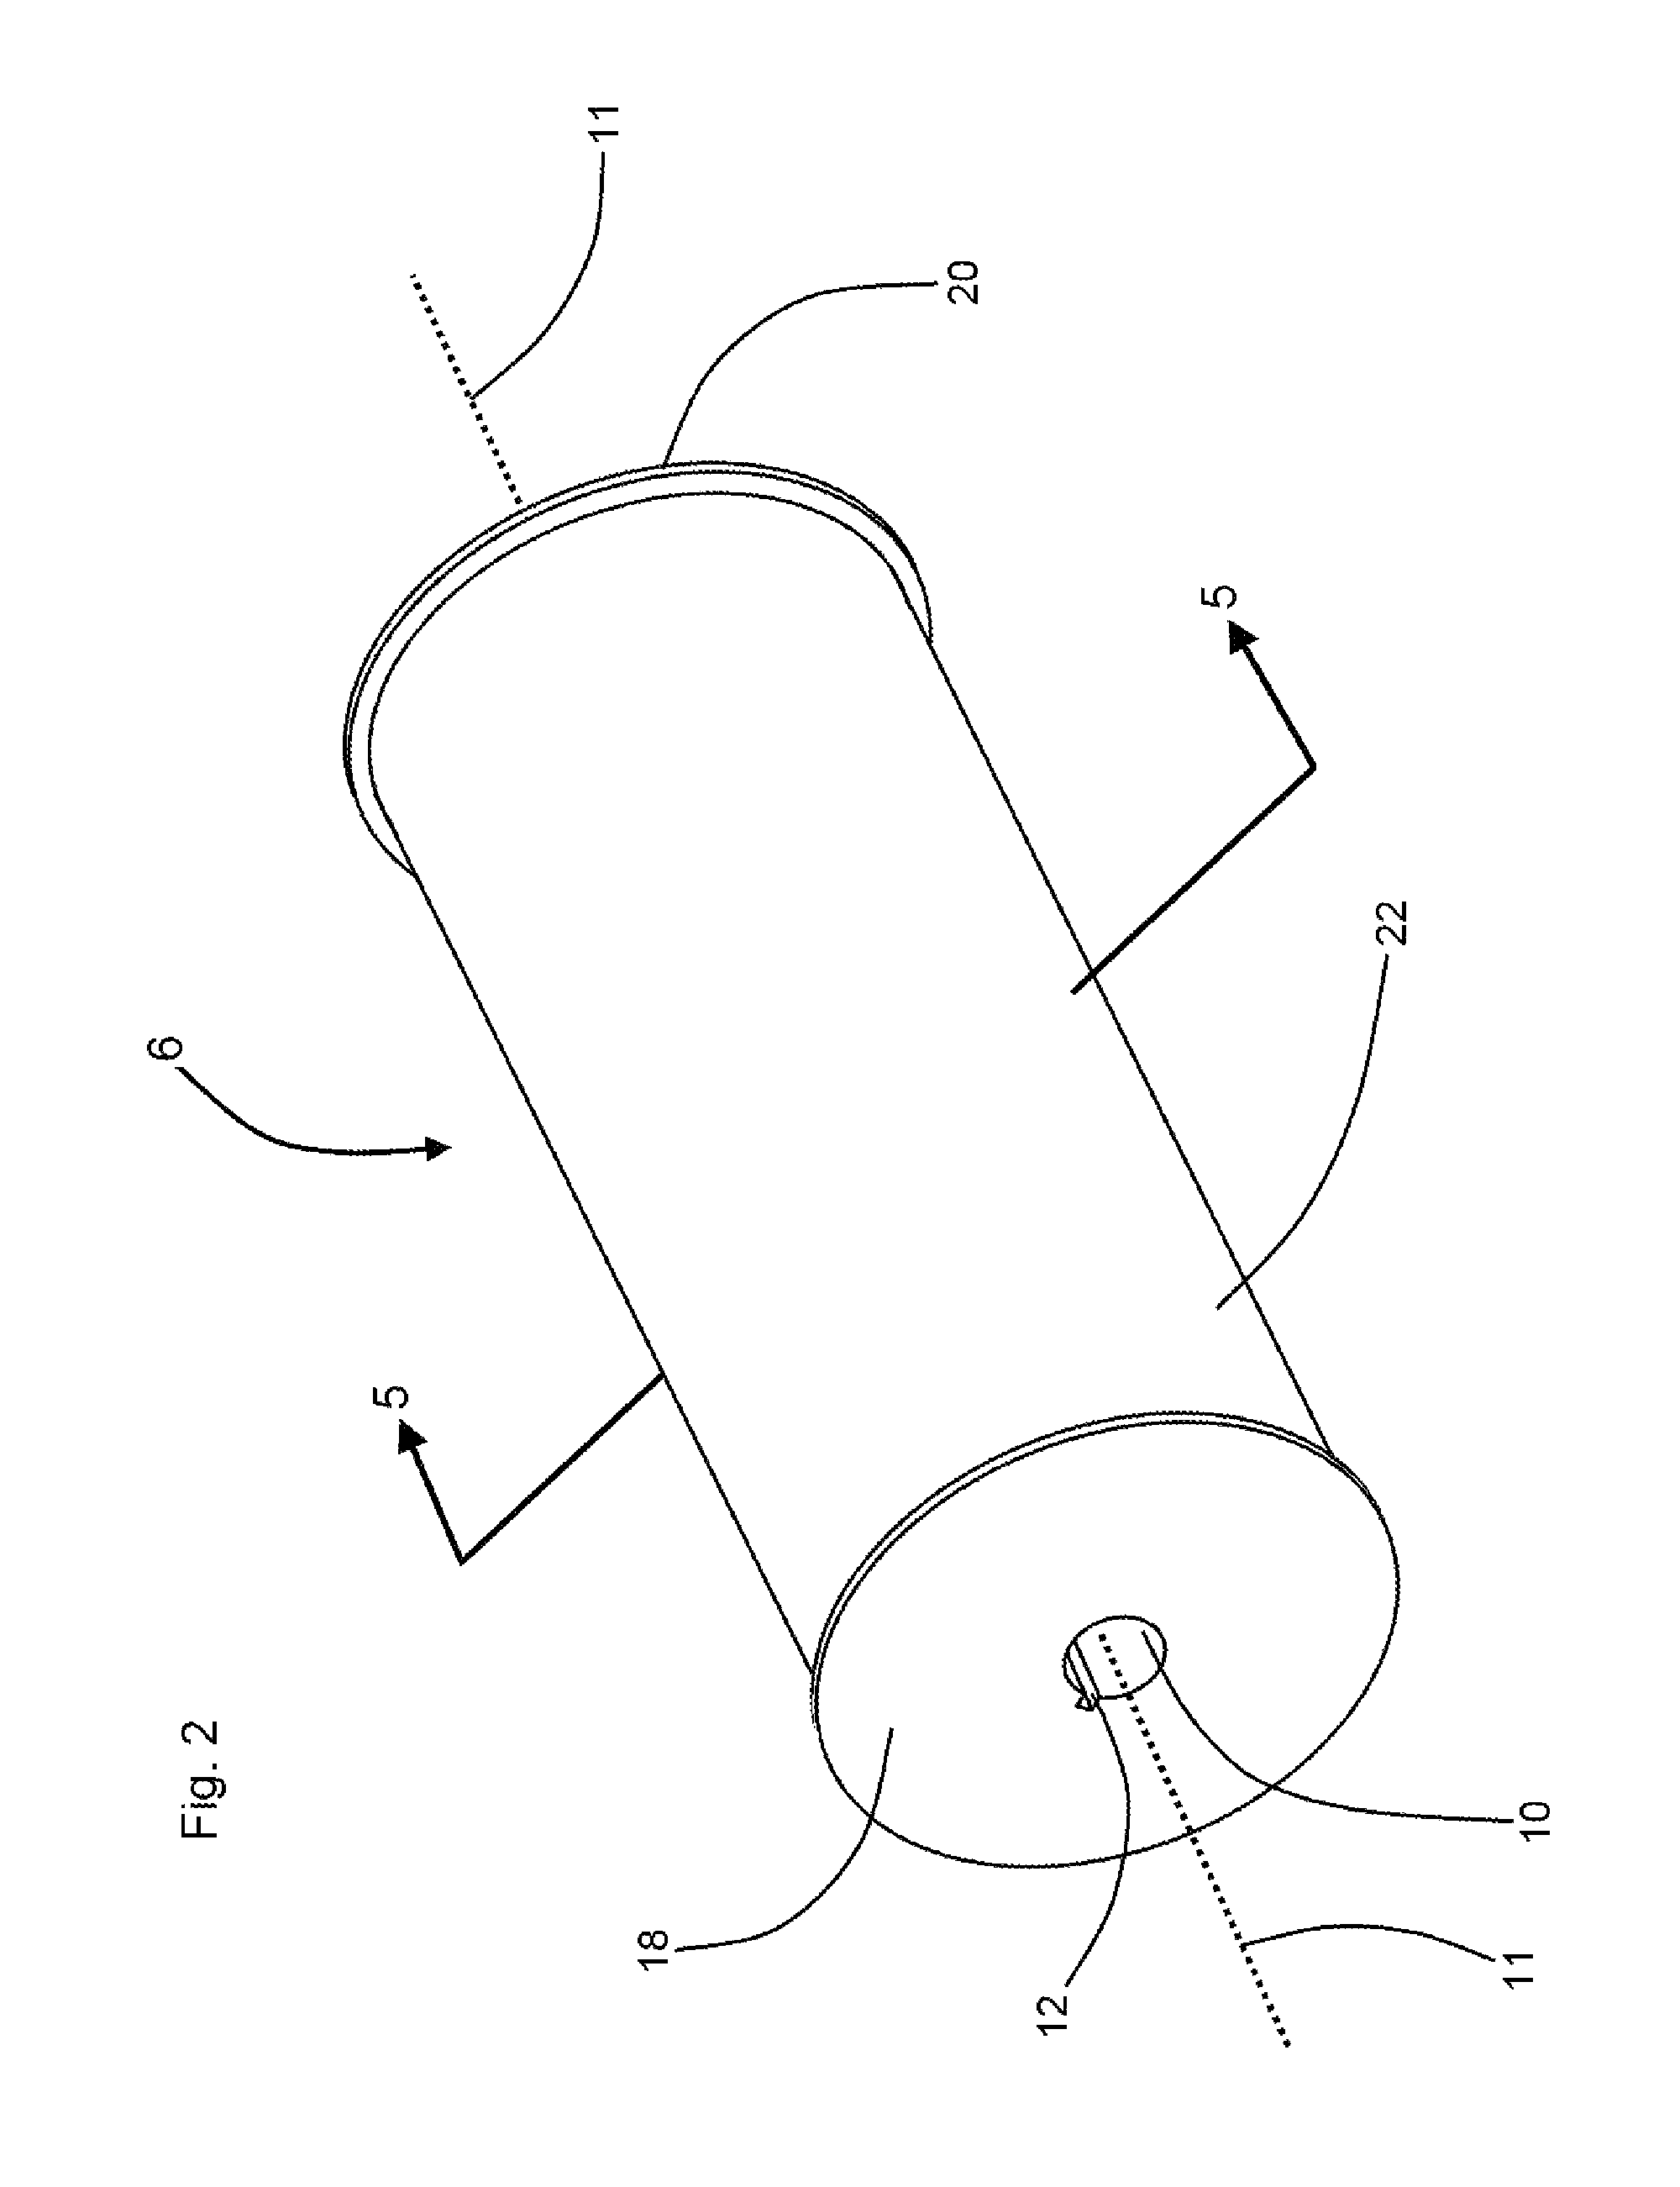 Magnetic assembly for loading and conveying ferrous metal articles